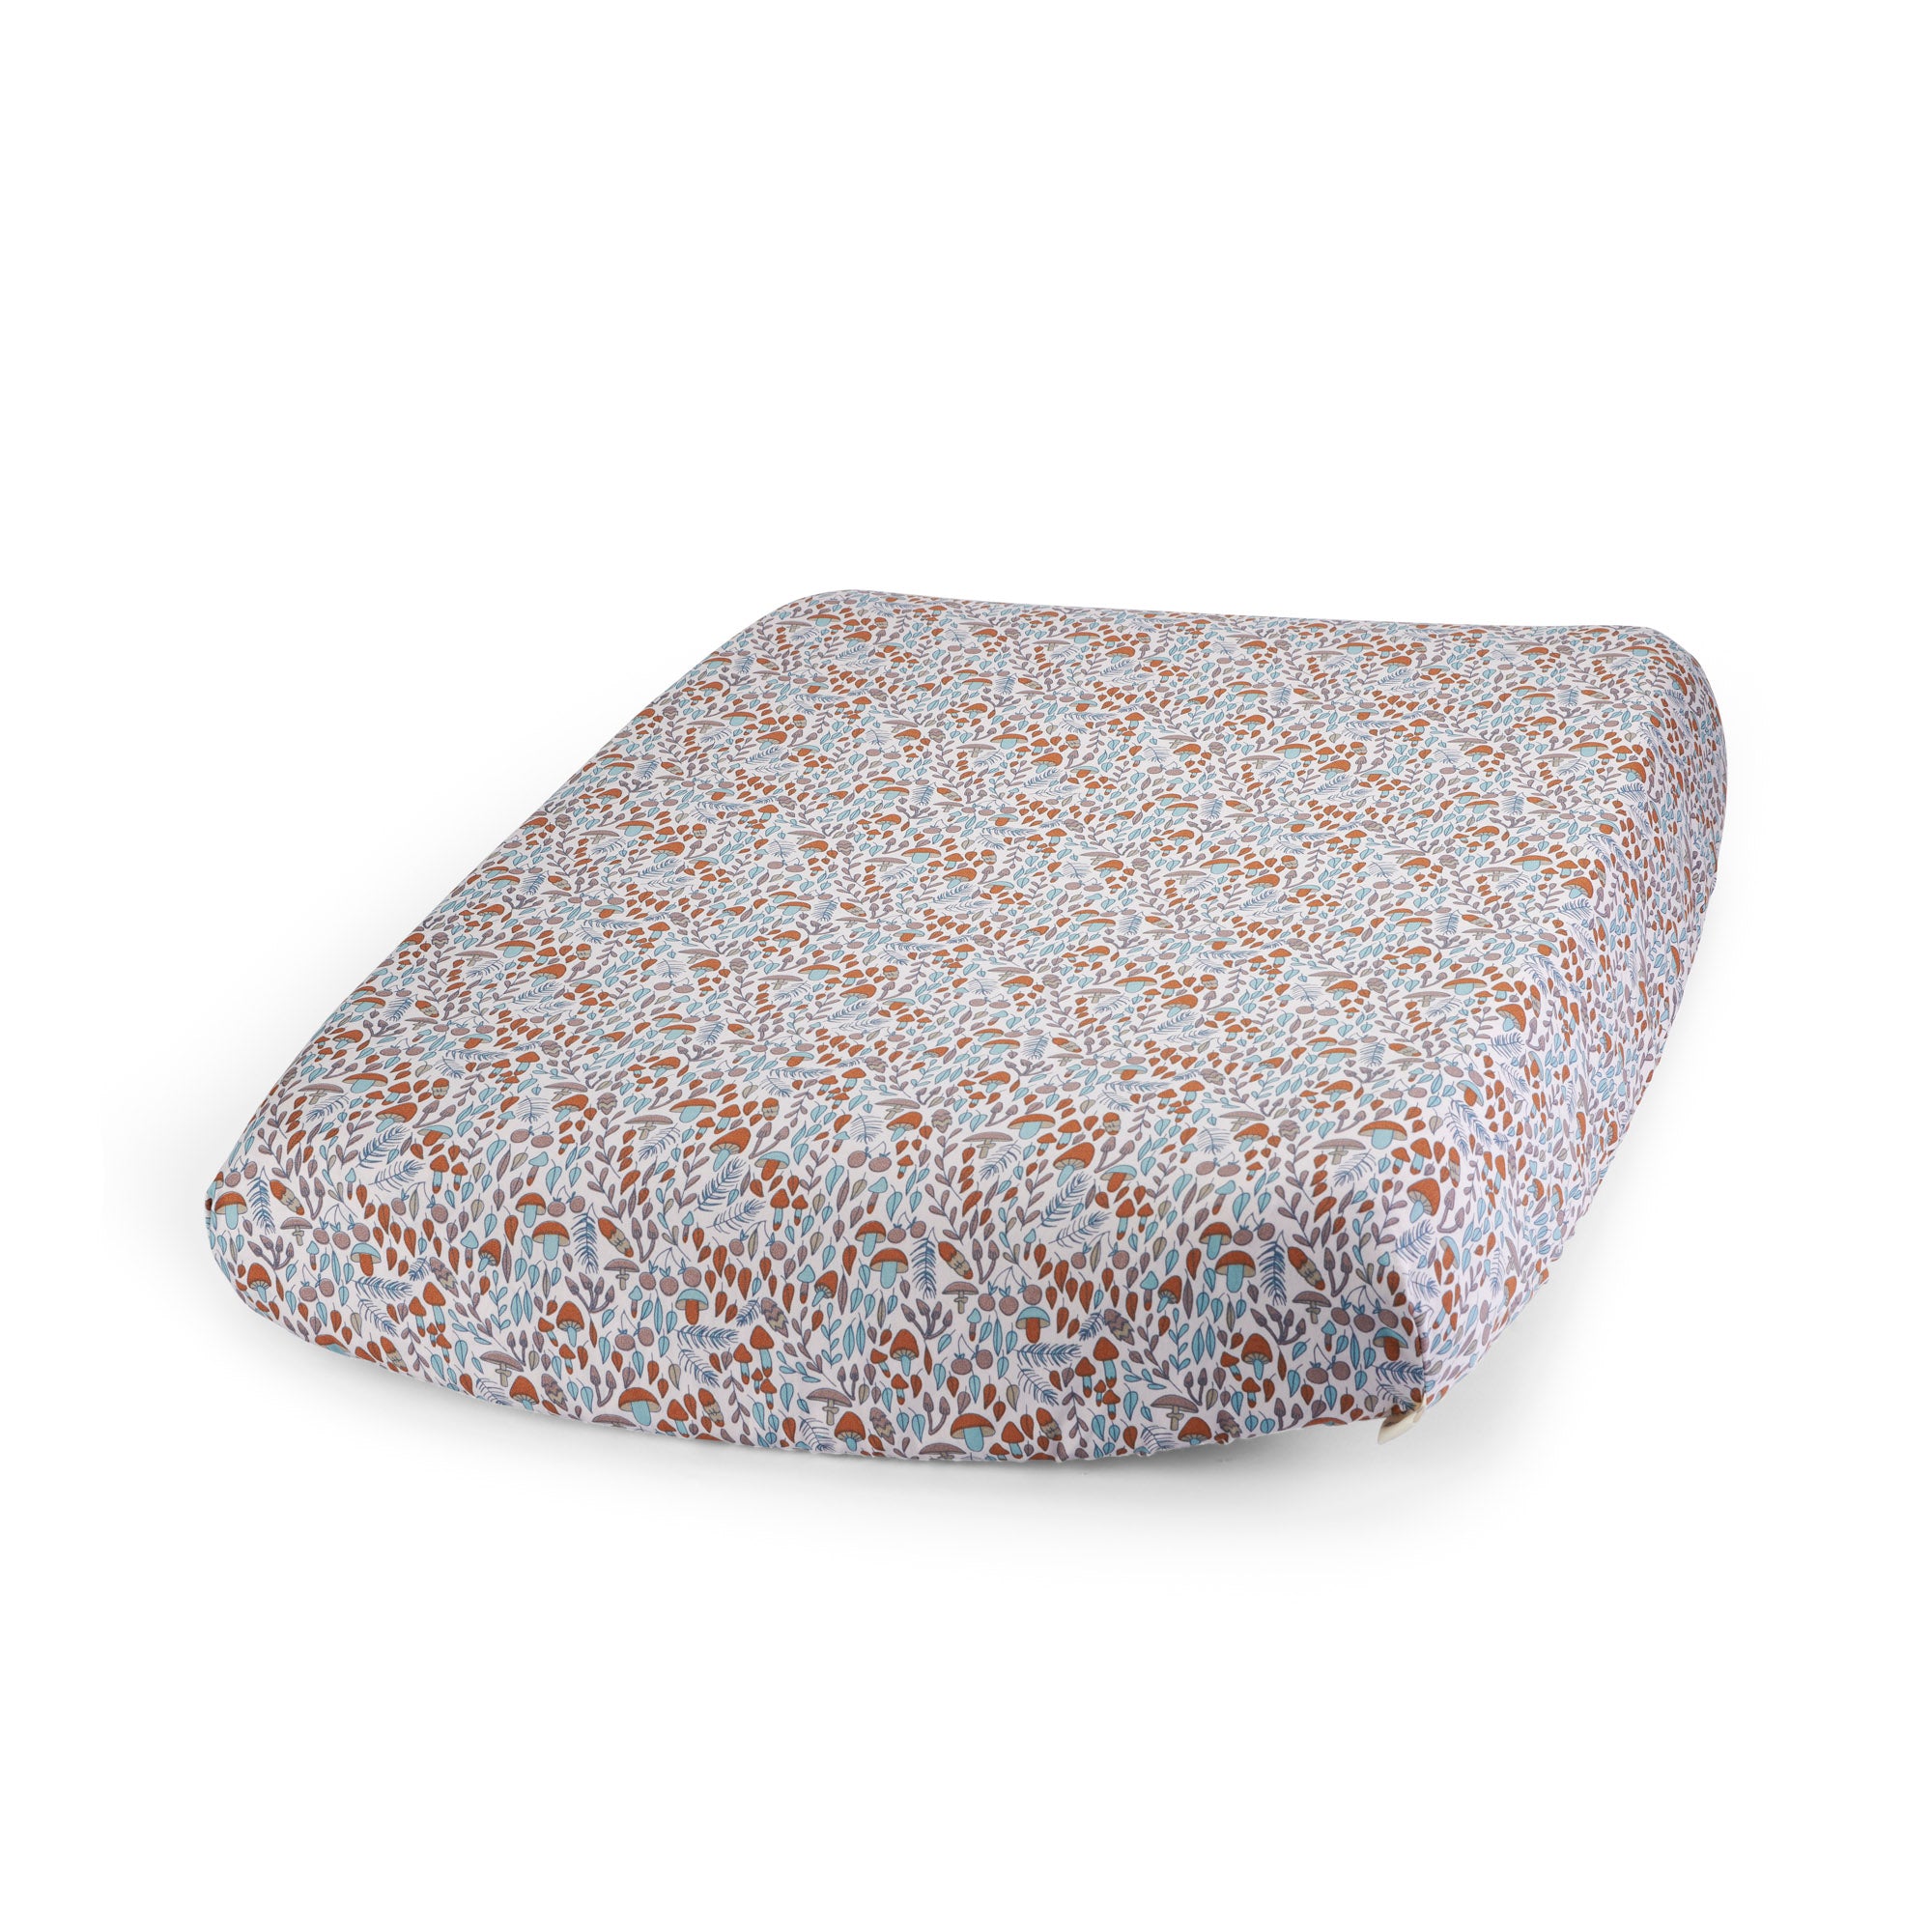 Changing Cushion Fitted Sheet - Woodland Walk - Avery Row